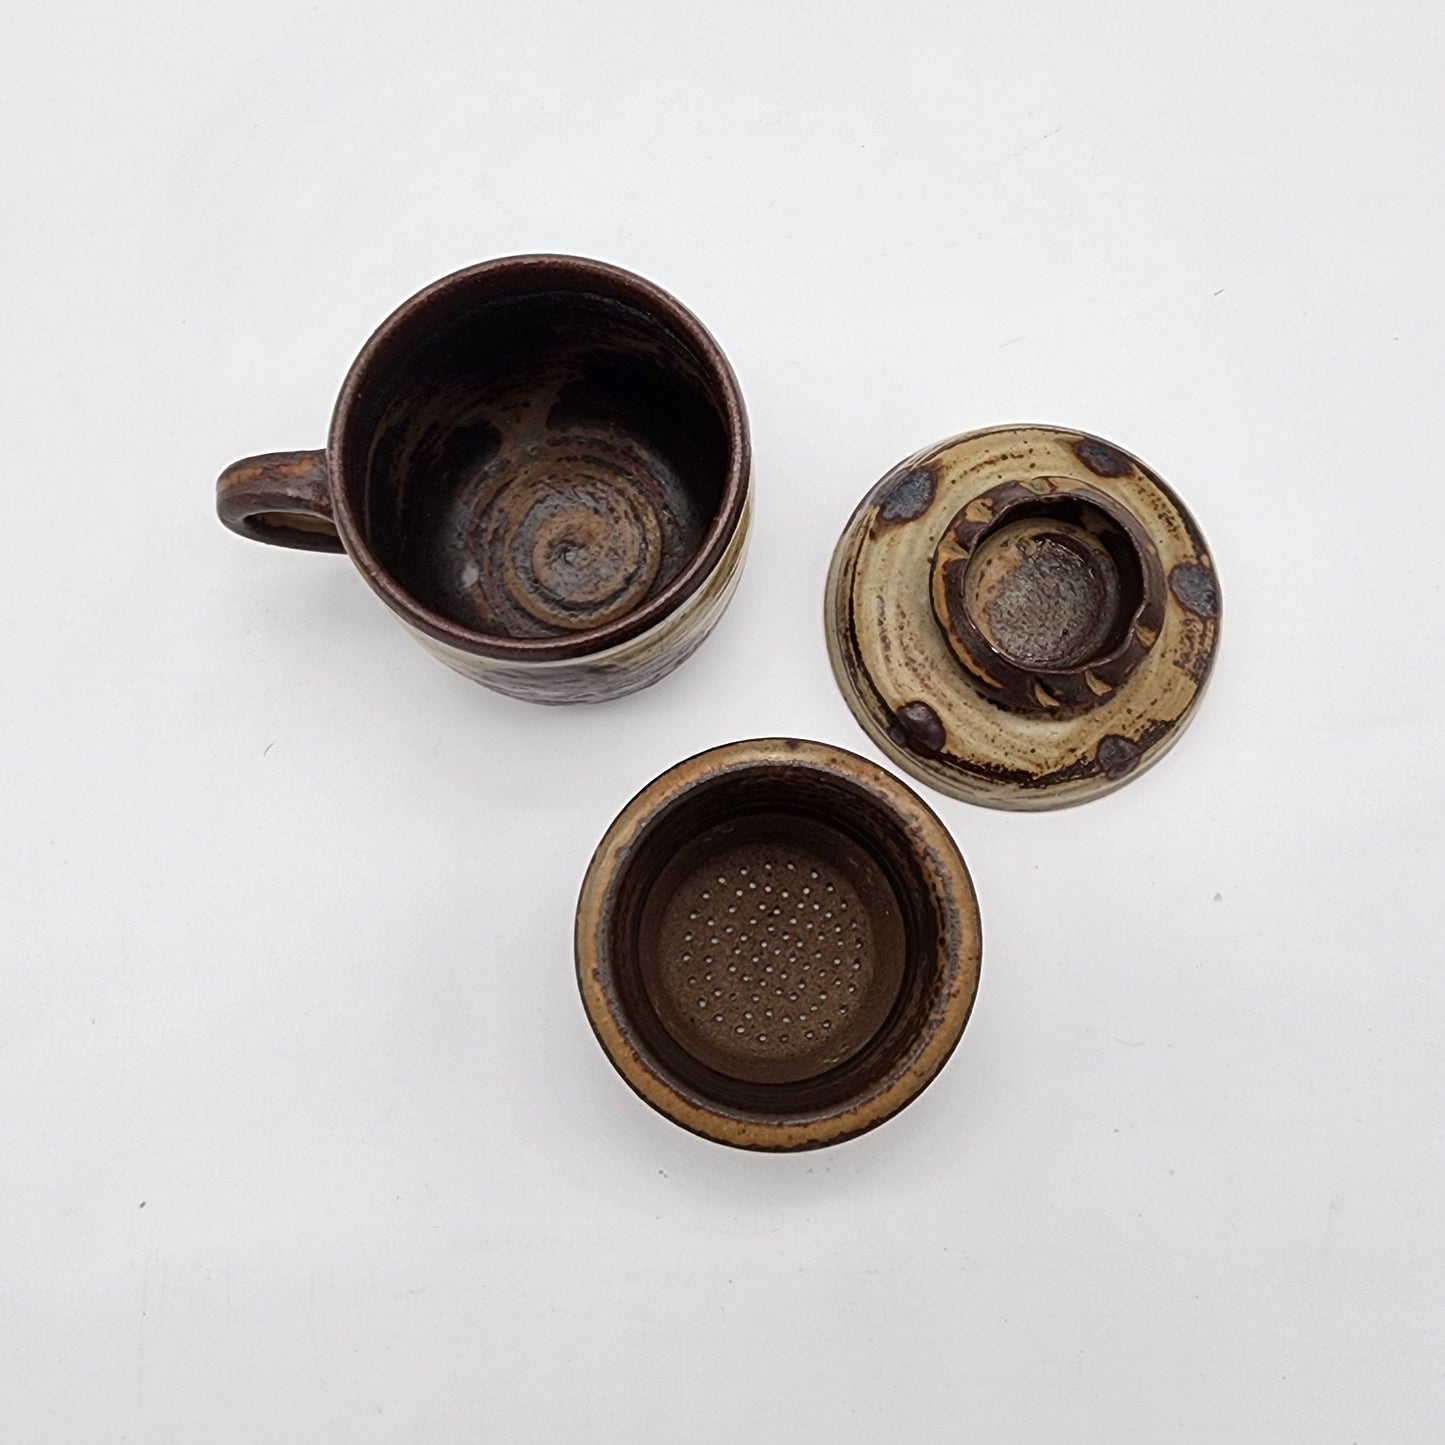 Stoneware Pottery Teacup with Infuser and Lid